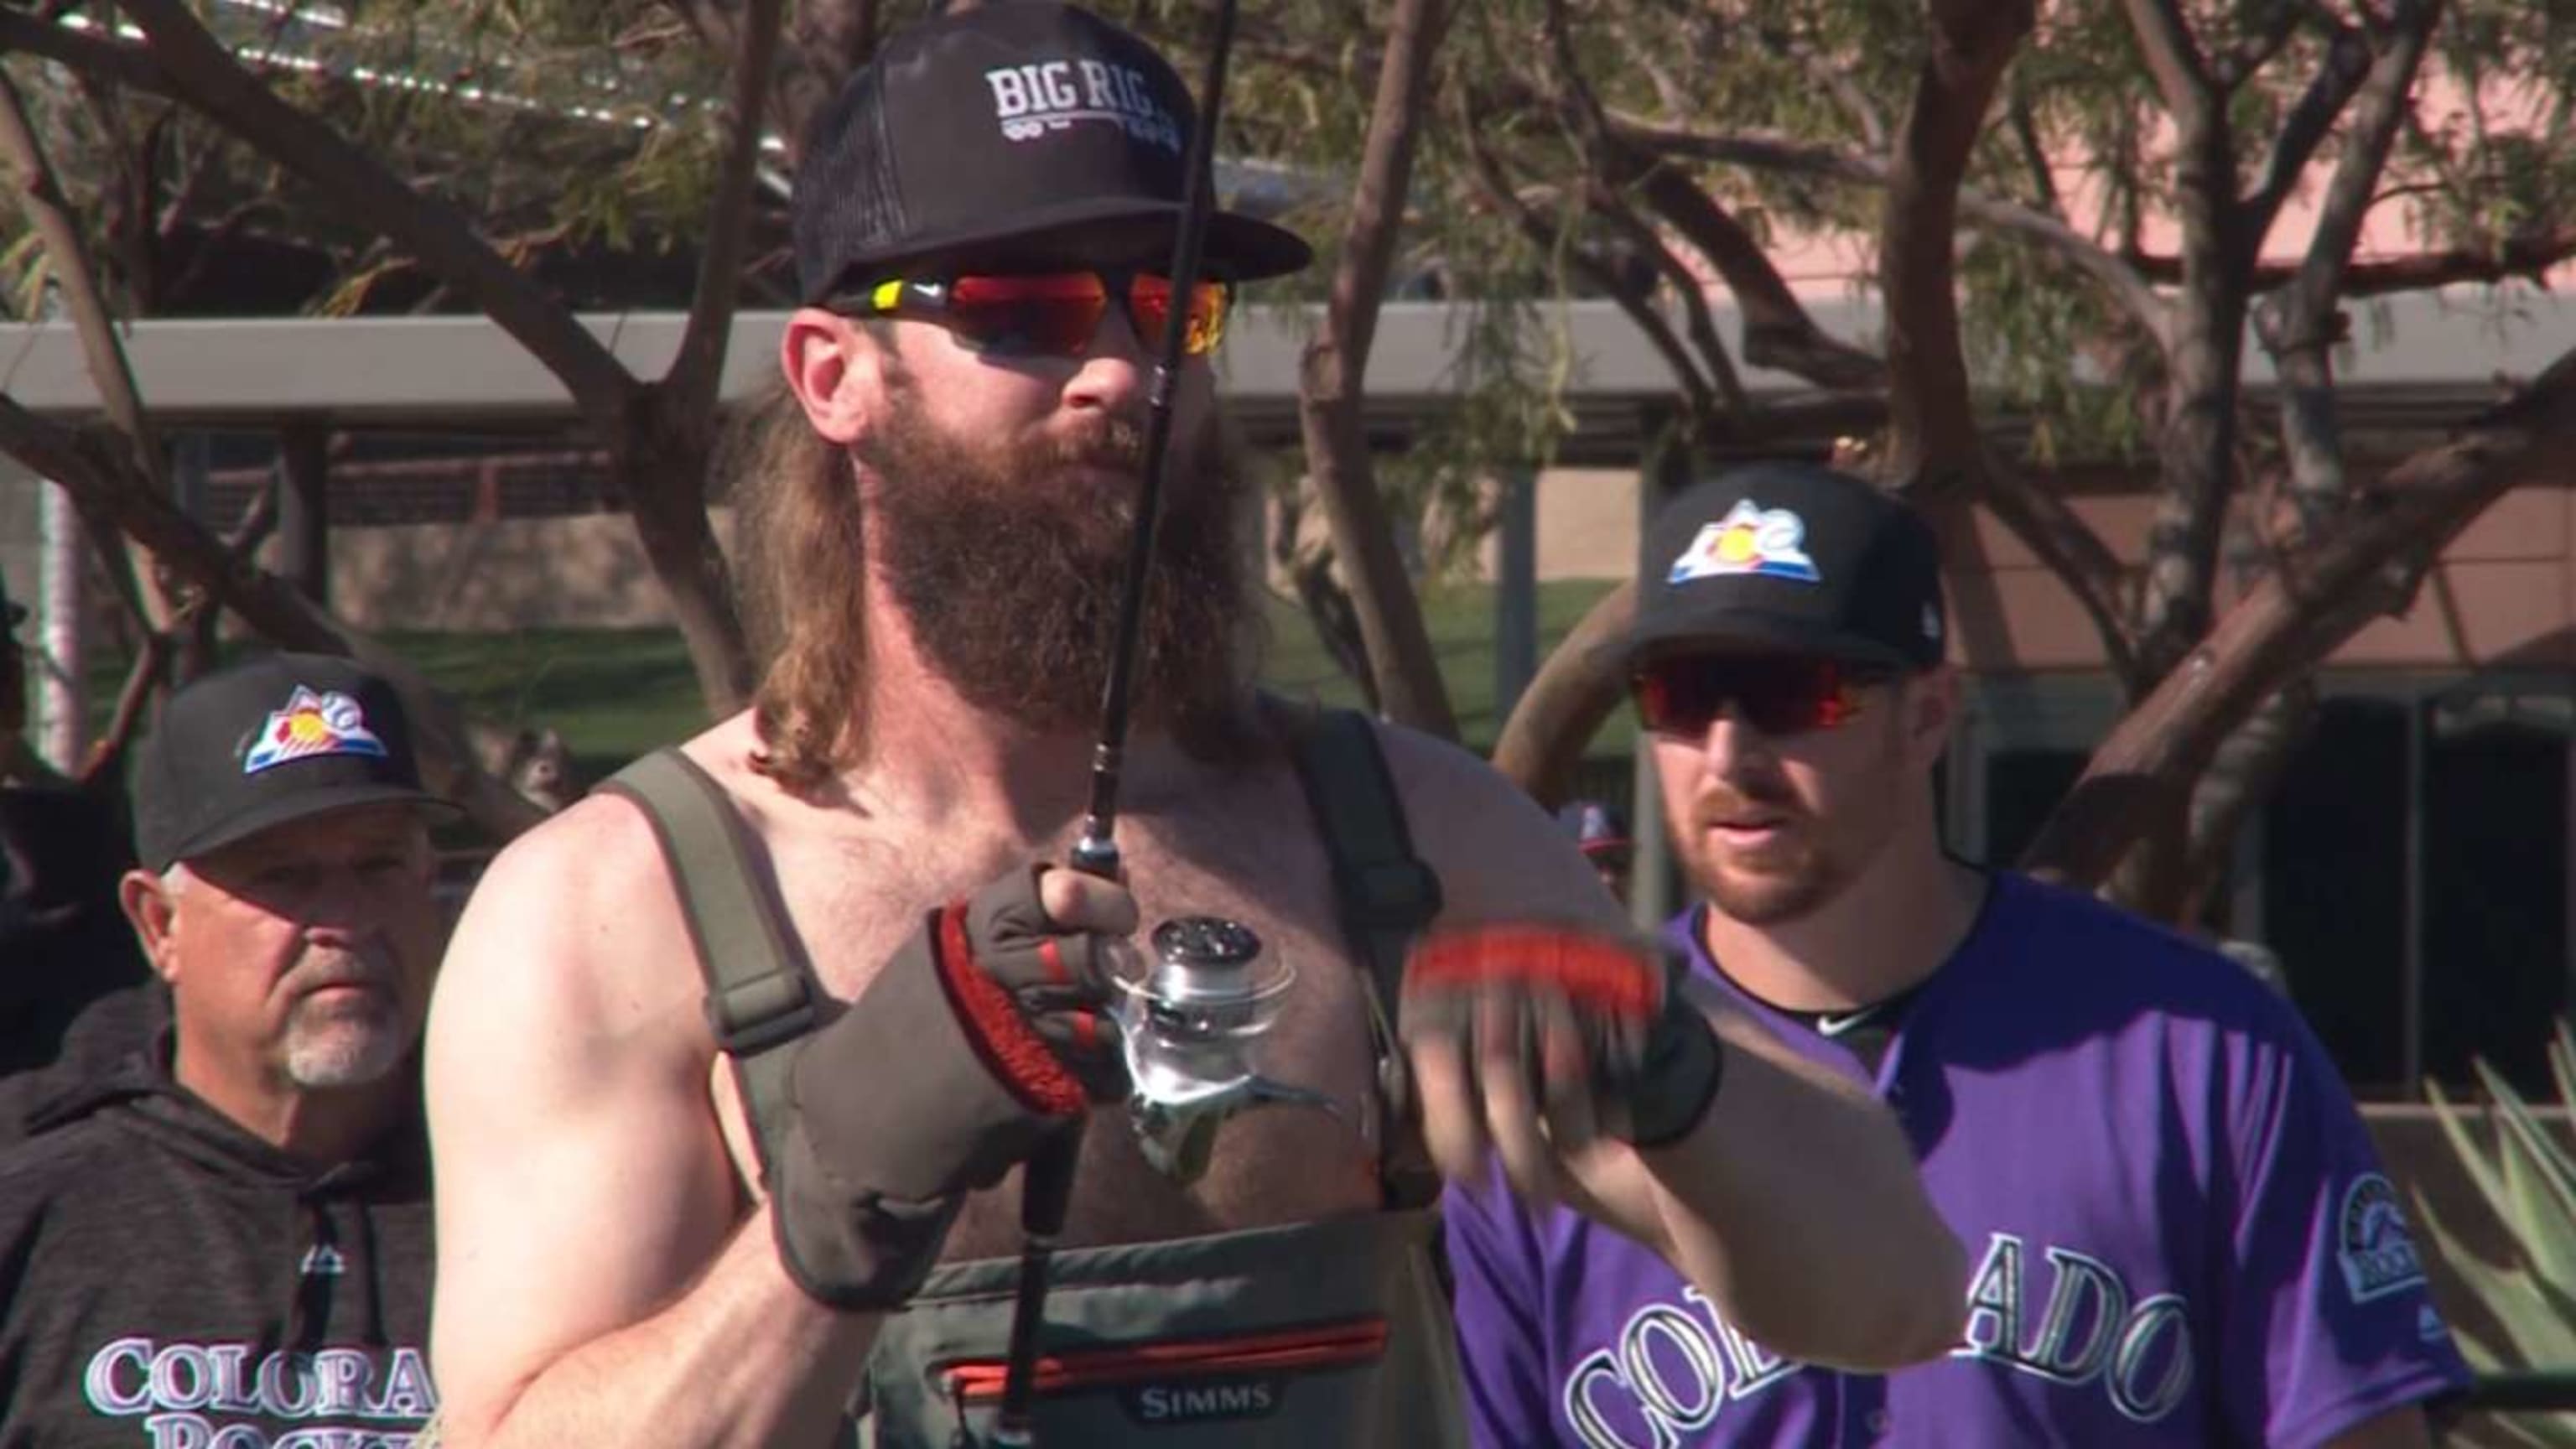 Charlie Blackmon wore ridiculous fishing waders at the Rockies' on